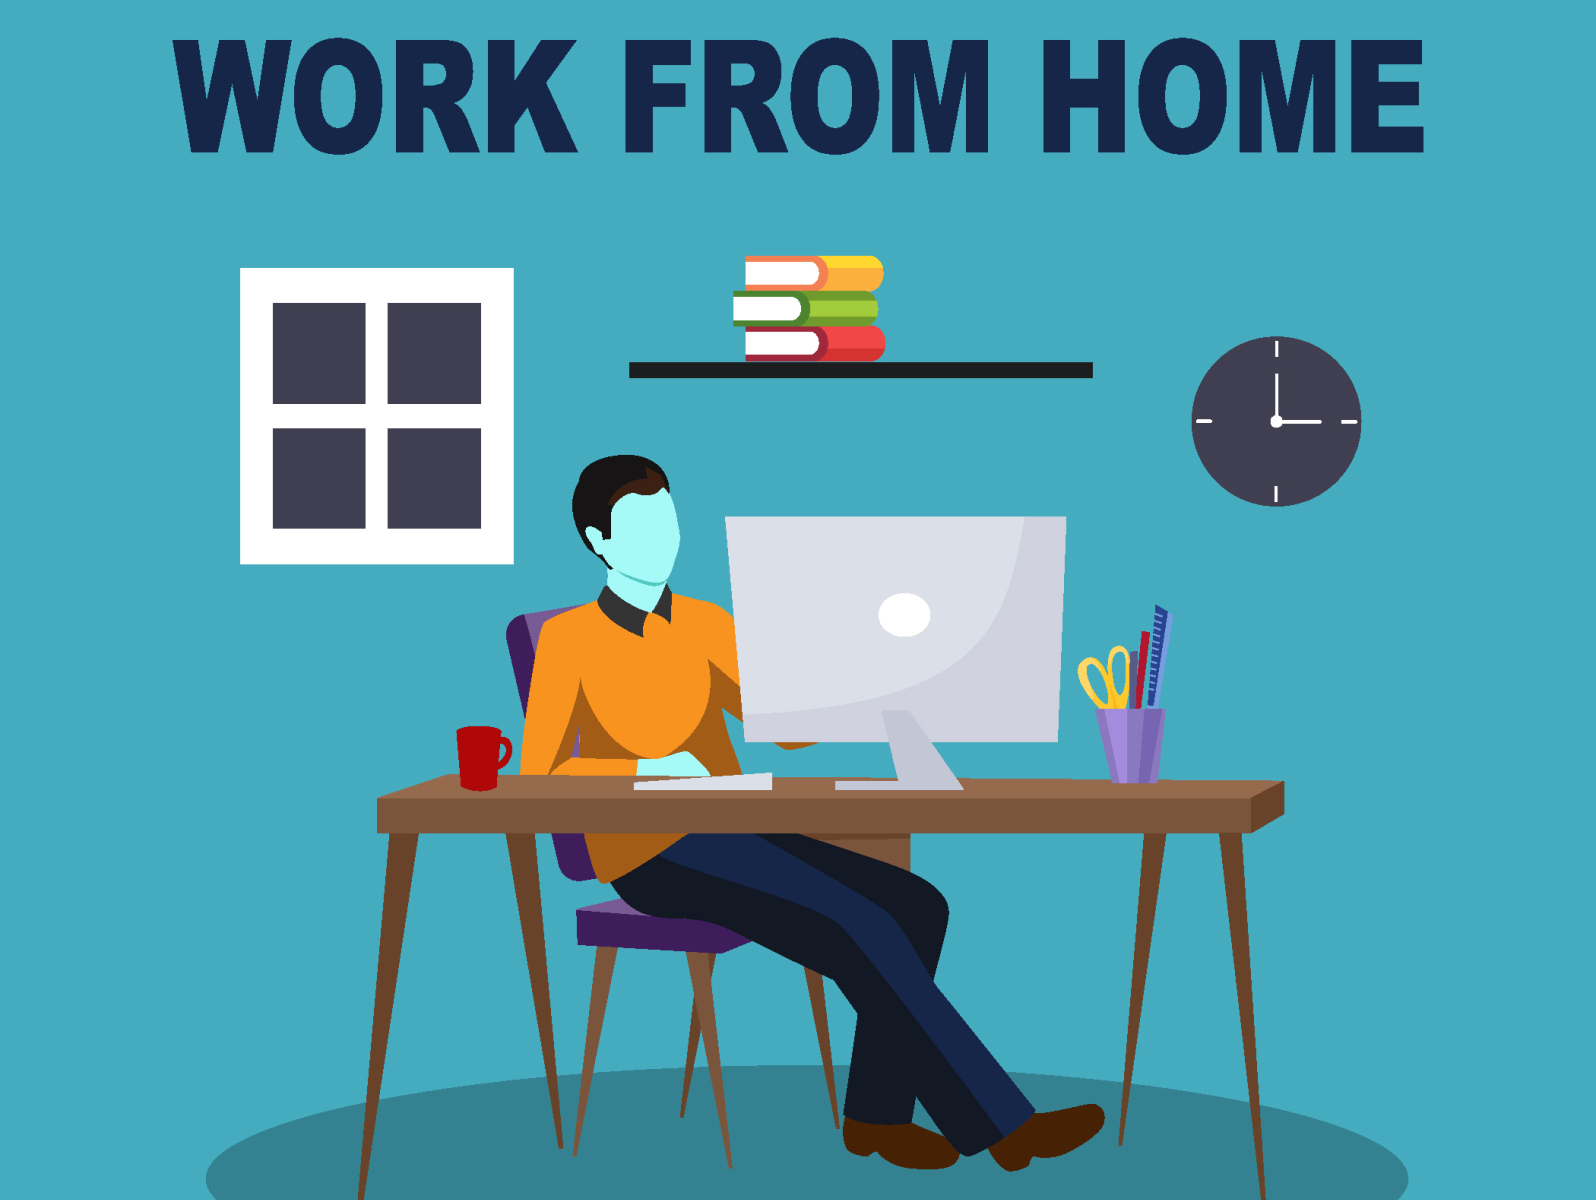 WFH Work From Home by SAPIE IRWAN on Dribbble